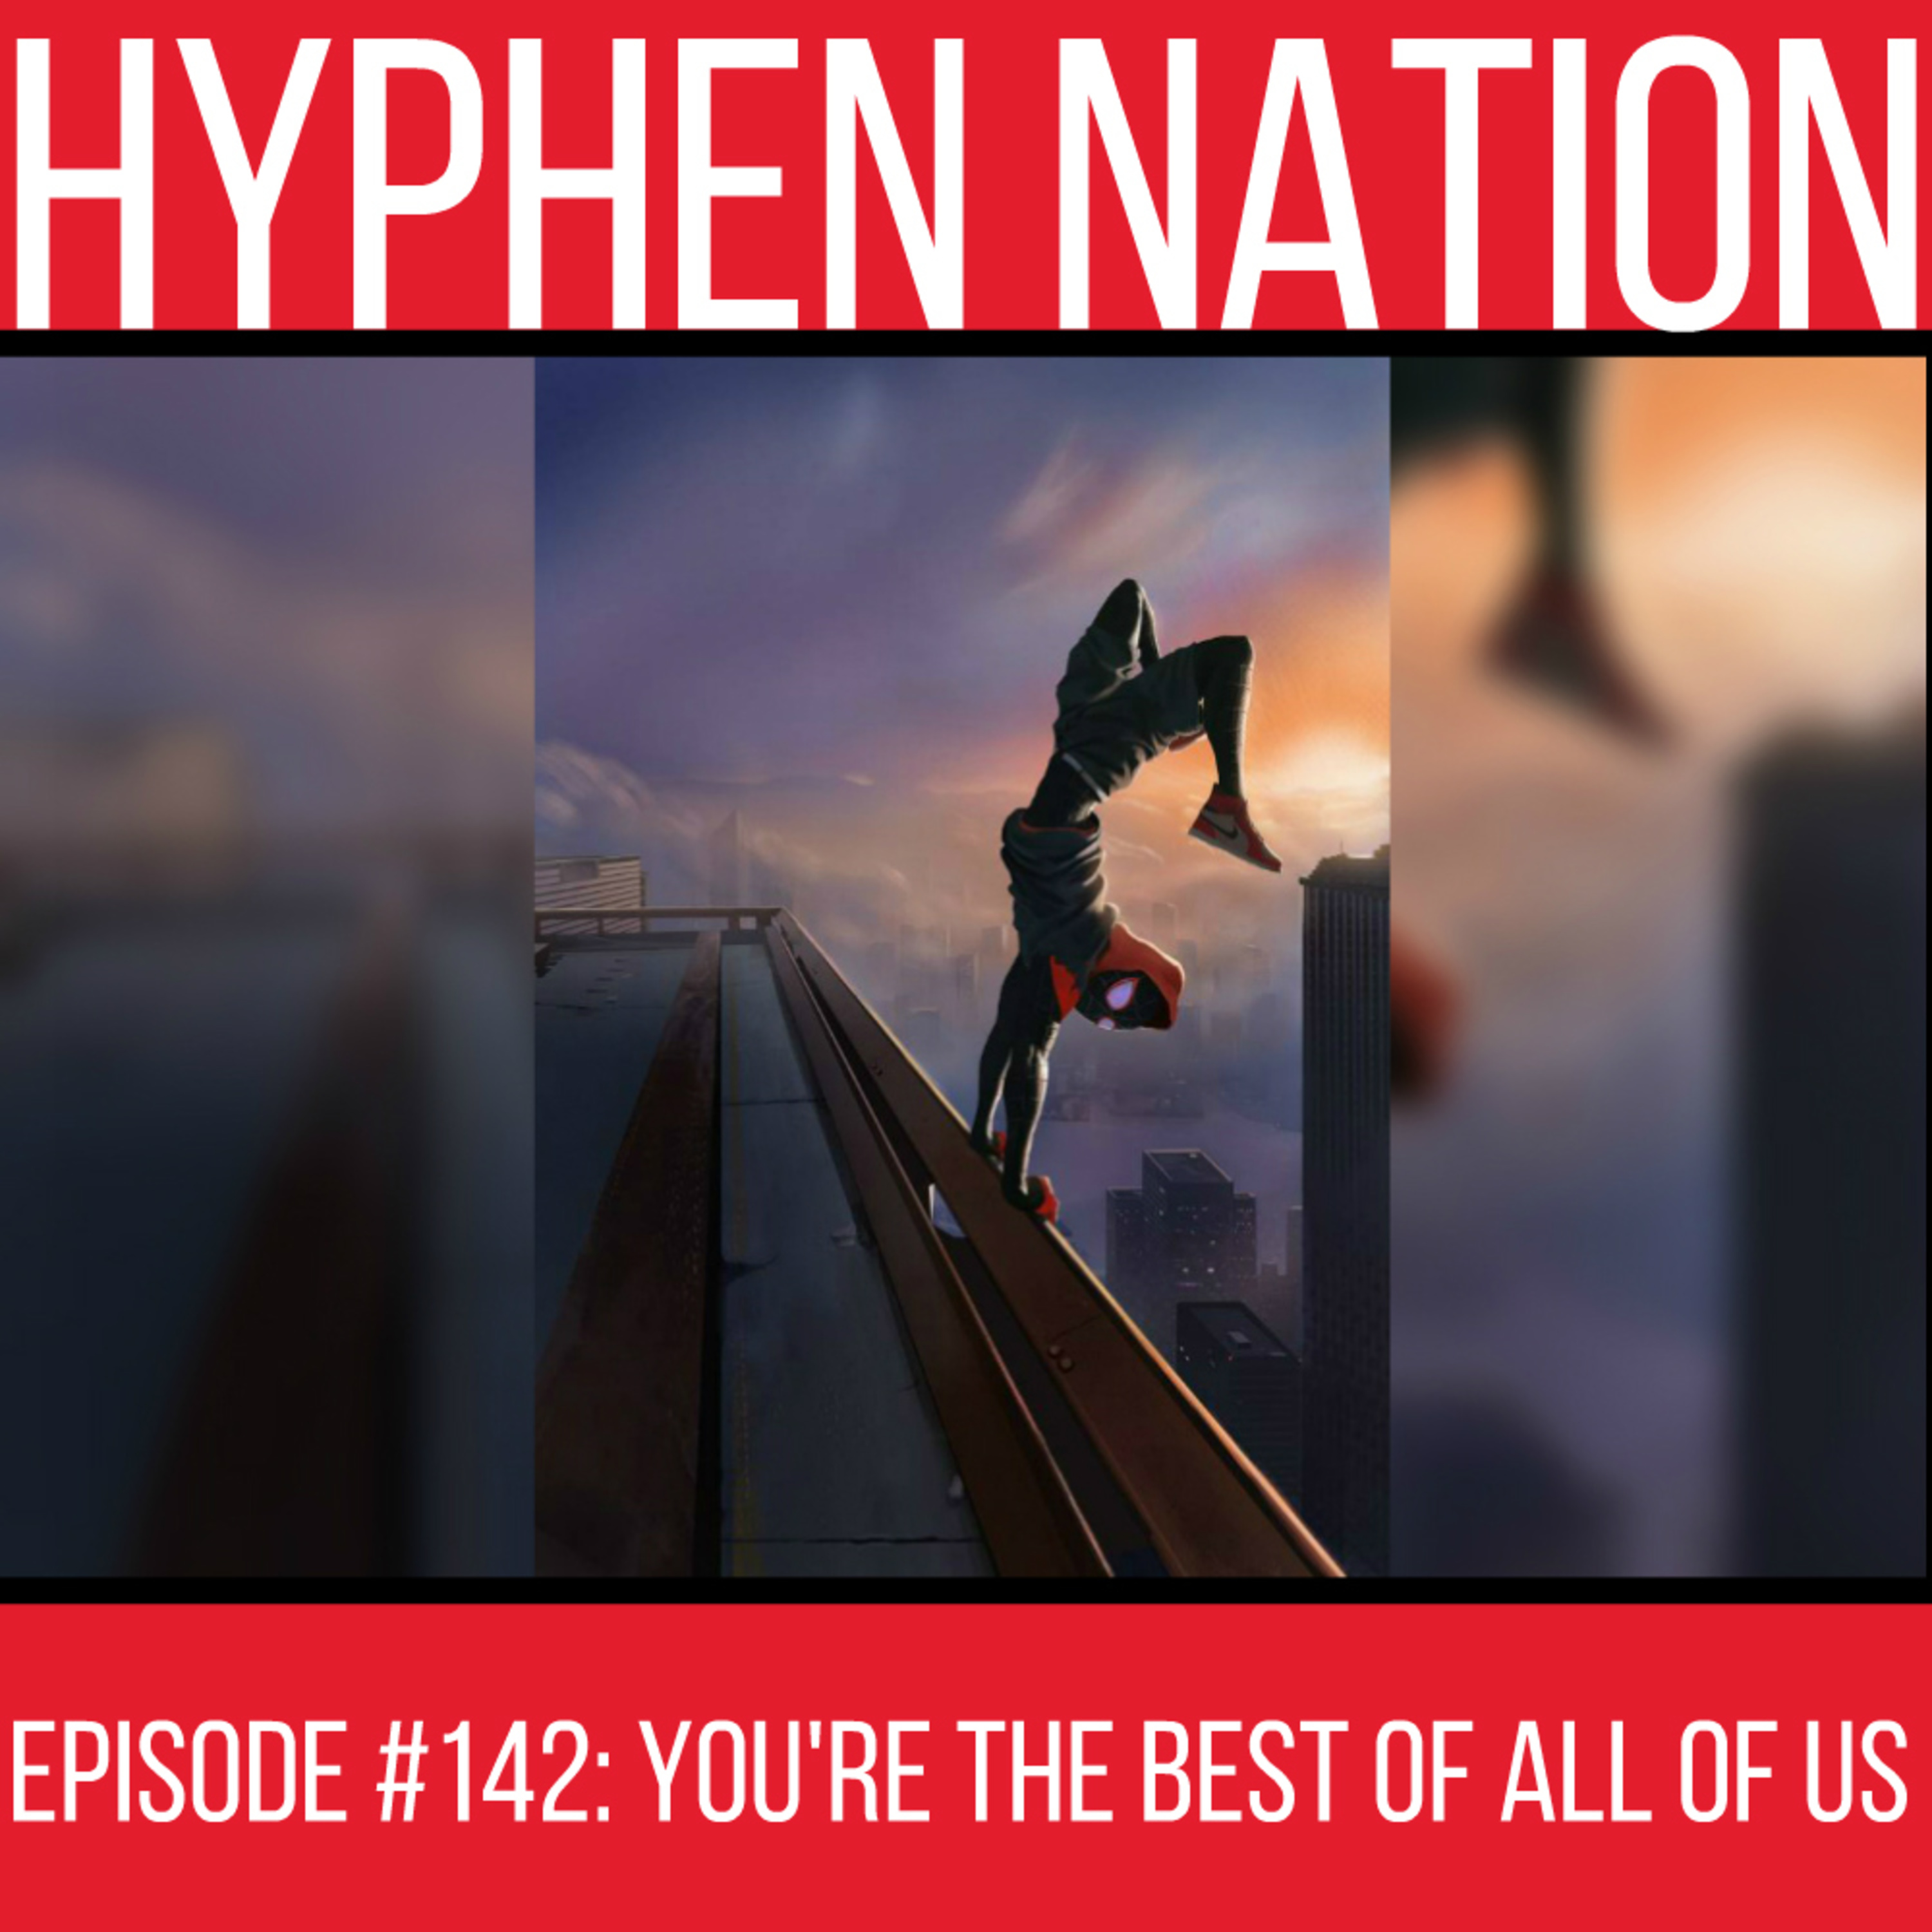 Episode #142: You're The Best Of All Of Us